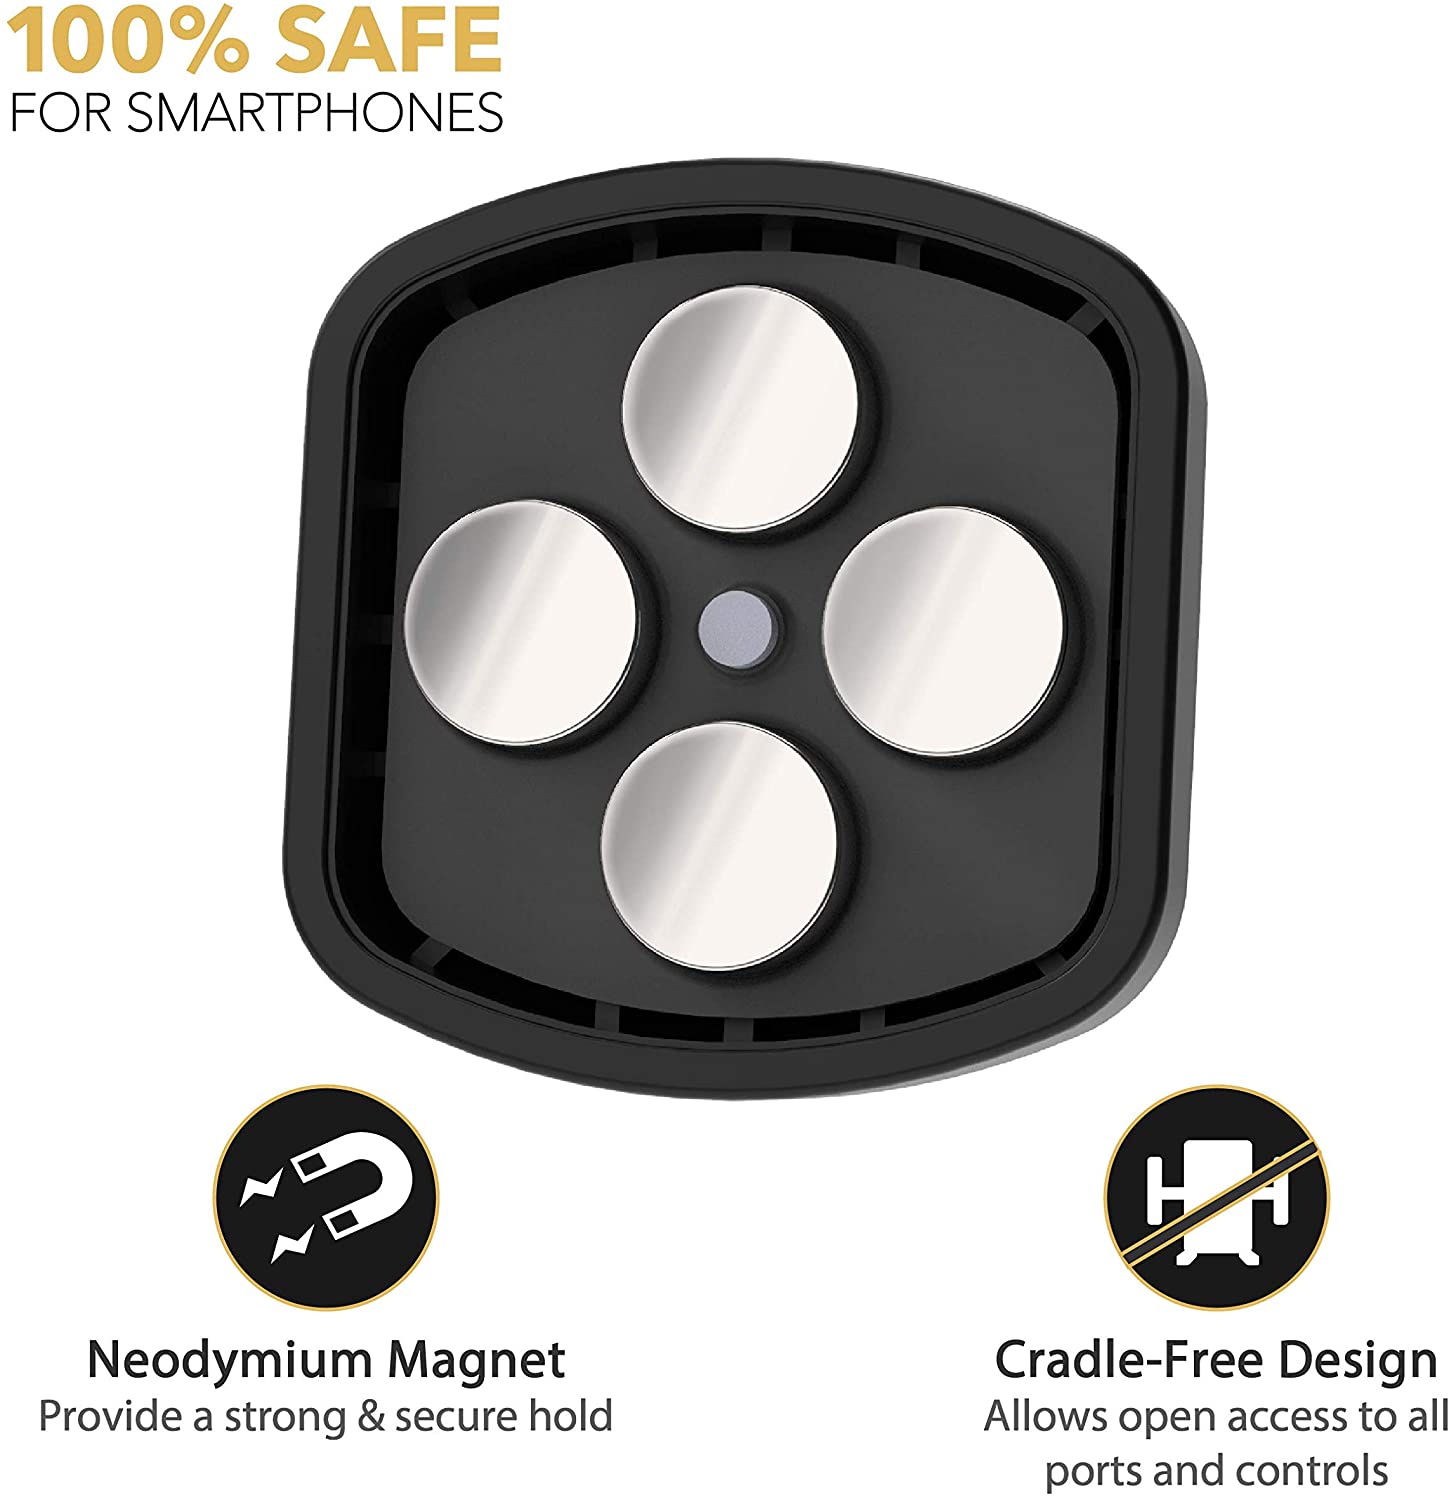 SCOSCHE MagicMount Crystal Universal Magnetic Phone and GPS Mount Perfect for Car, Home or Office - Black